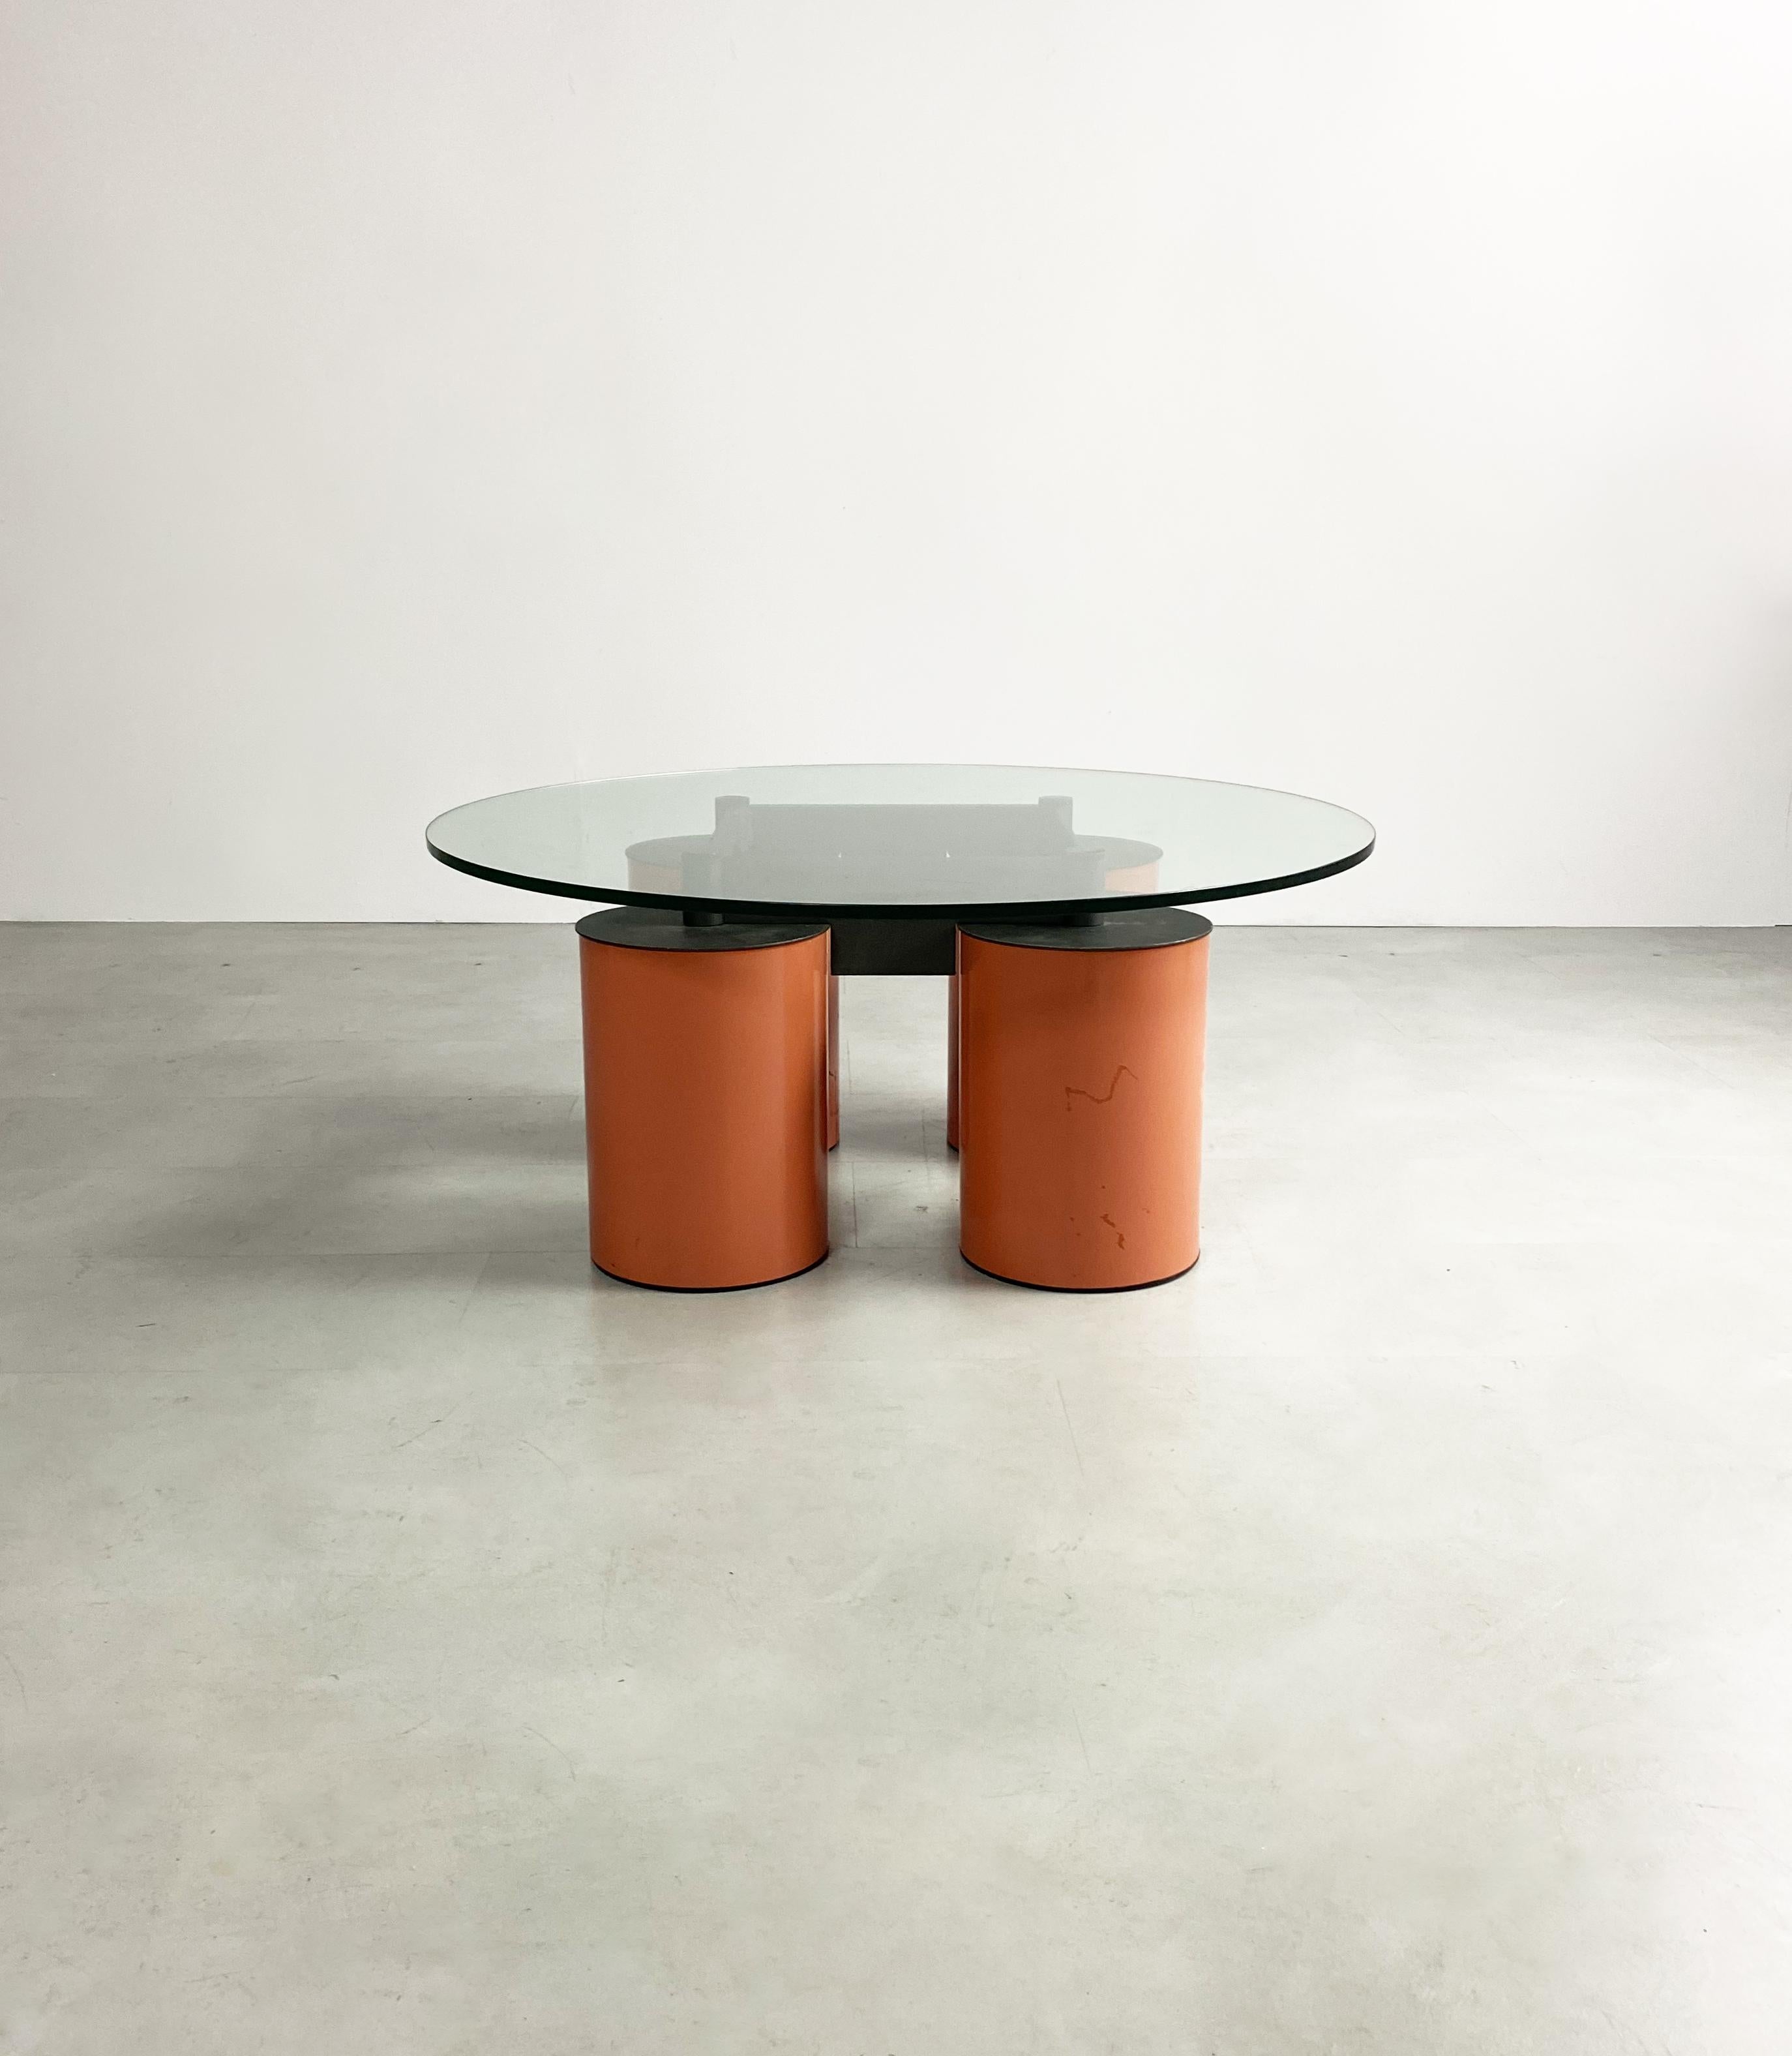 Superb postmodern Italian design from the Vignelli’s with peach lacquered, oversized steel drum legs and granite coloured powder coasted base supporting the circular glass top.

Dimensions (cm, approx): 
Height: 37
Diameter: 111


Condition: